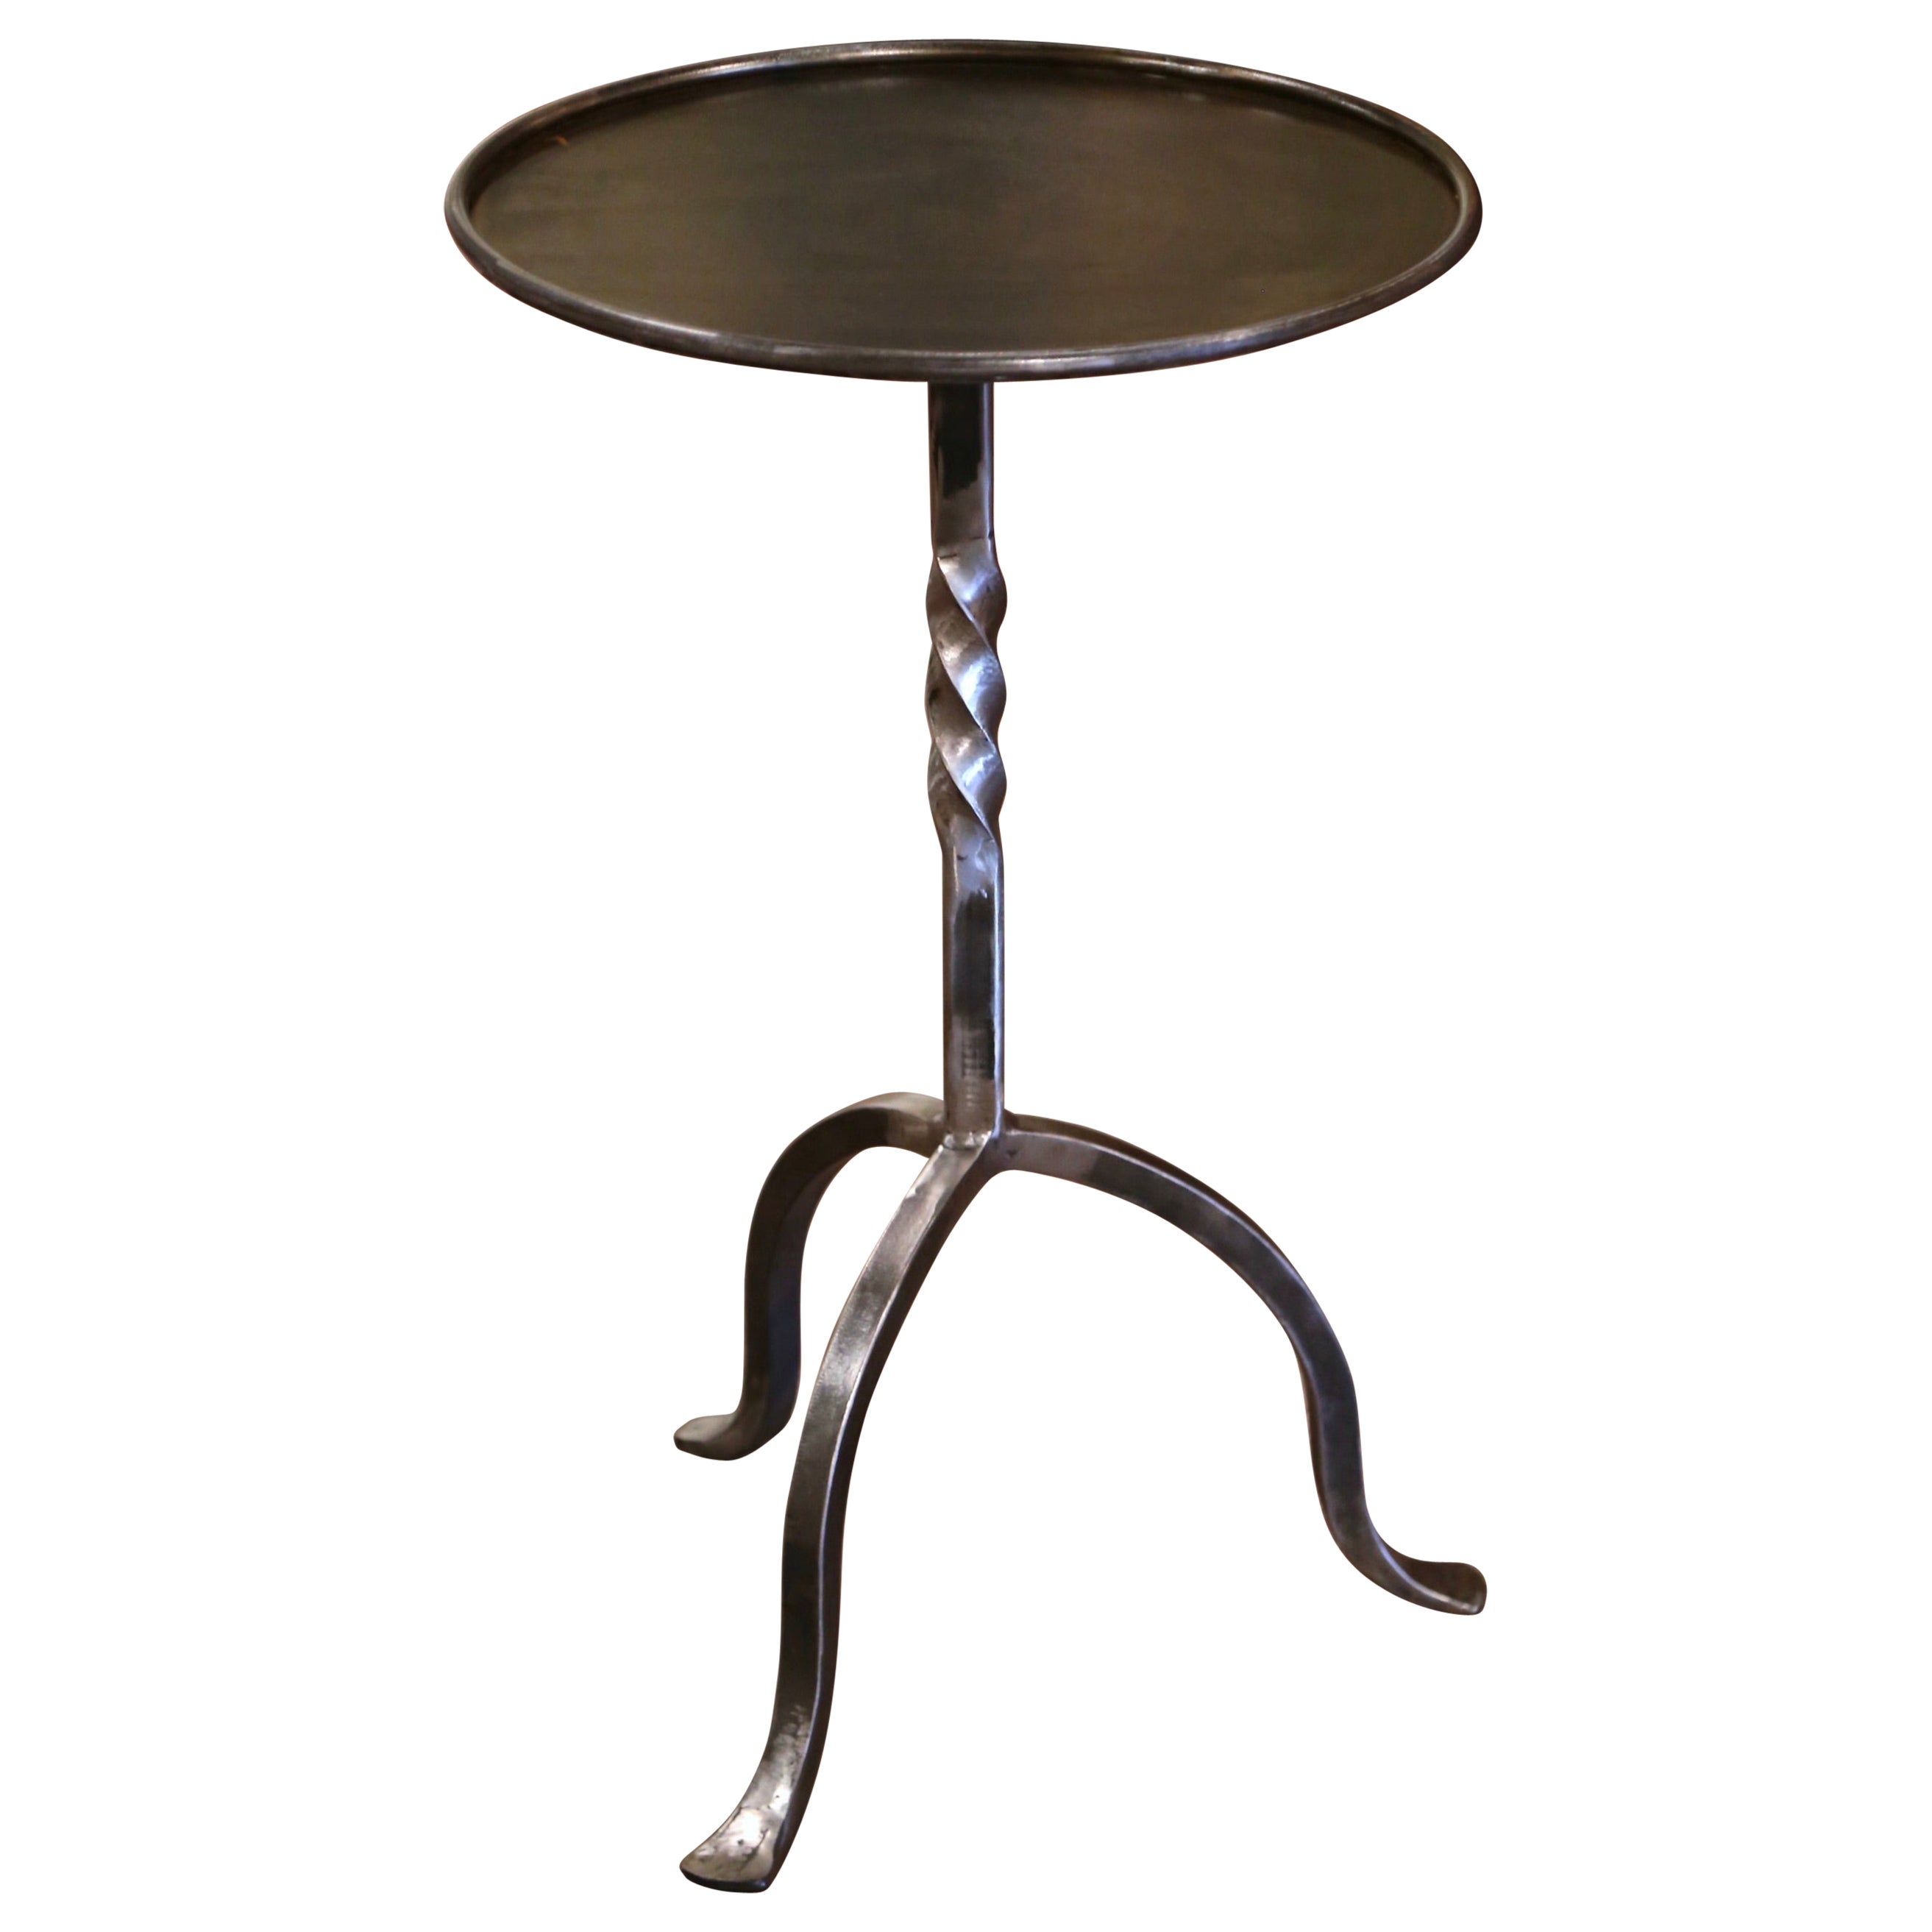 French Style Polished Iron Pedestal Martini Side Table